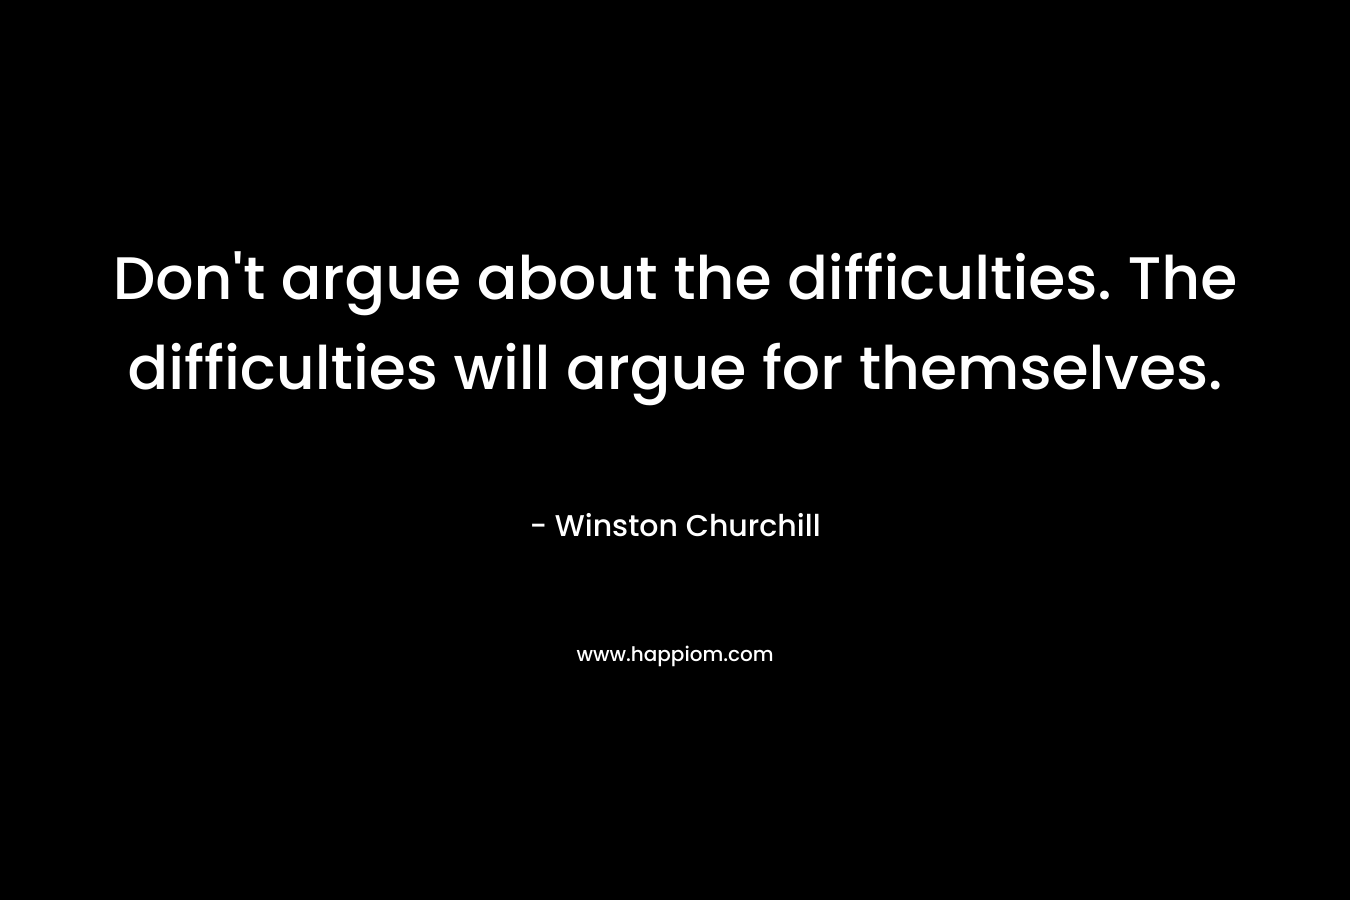 Don't argue about the difficulties. The difficulties will argue for themselves.